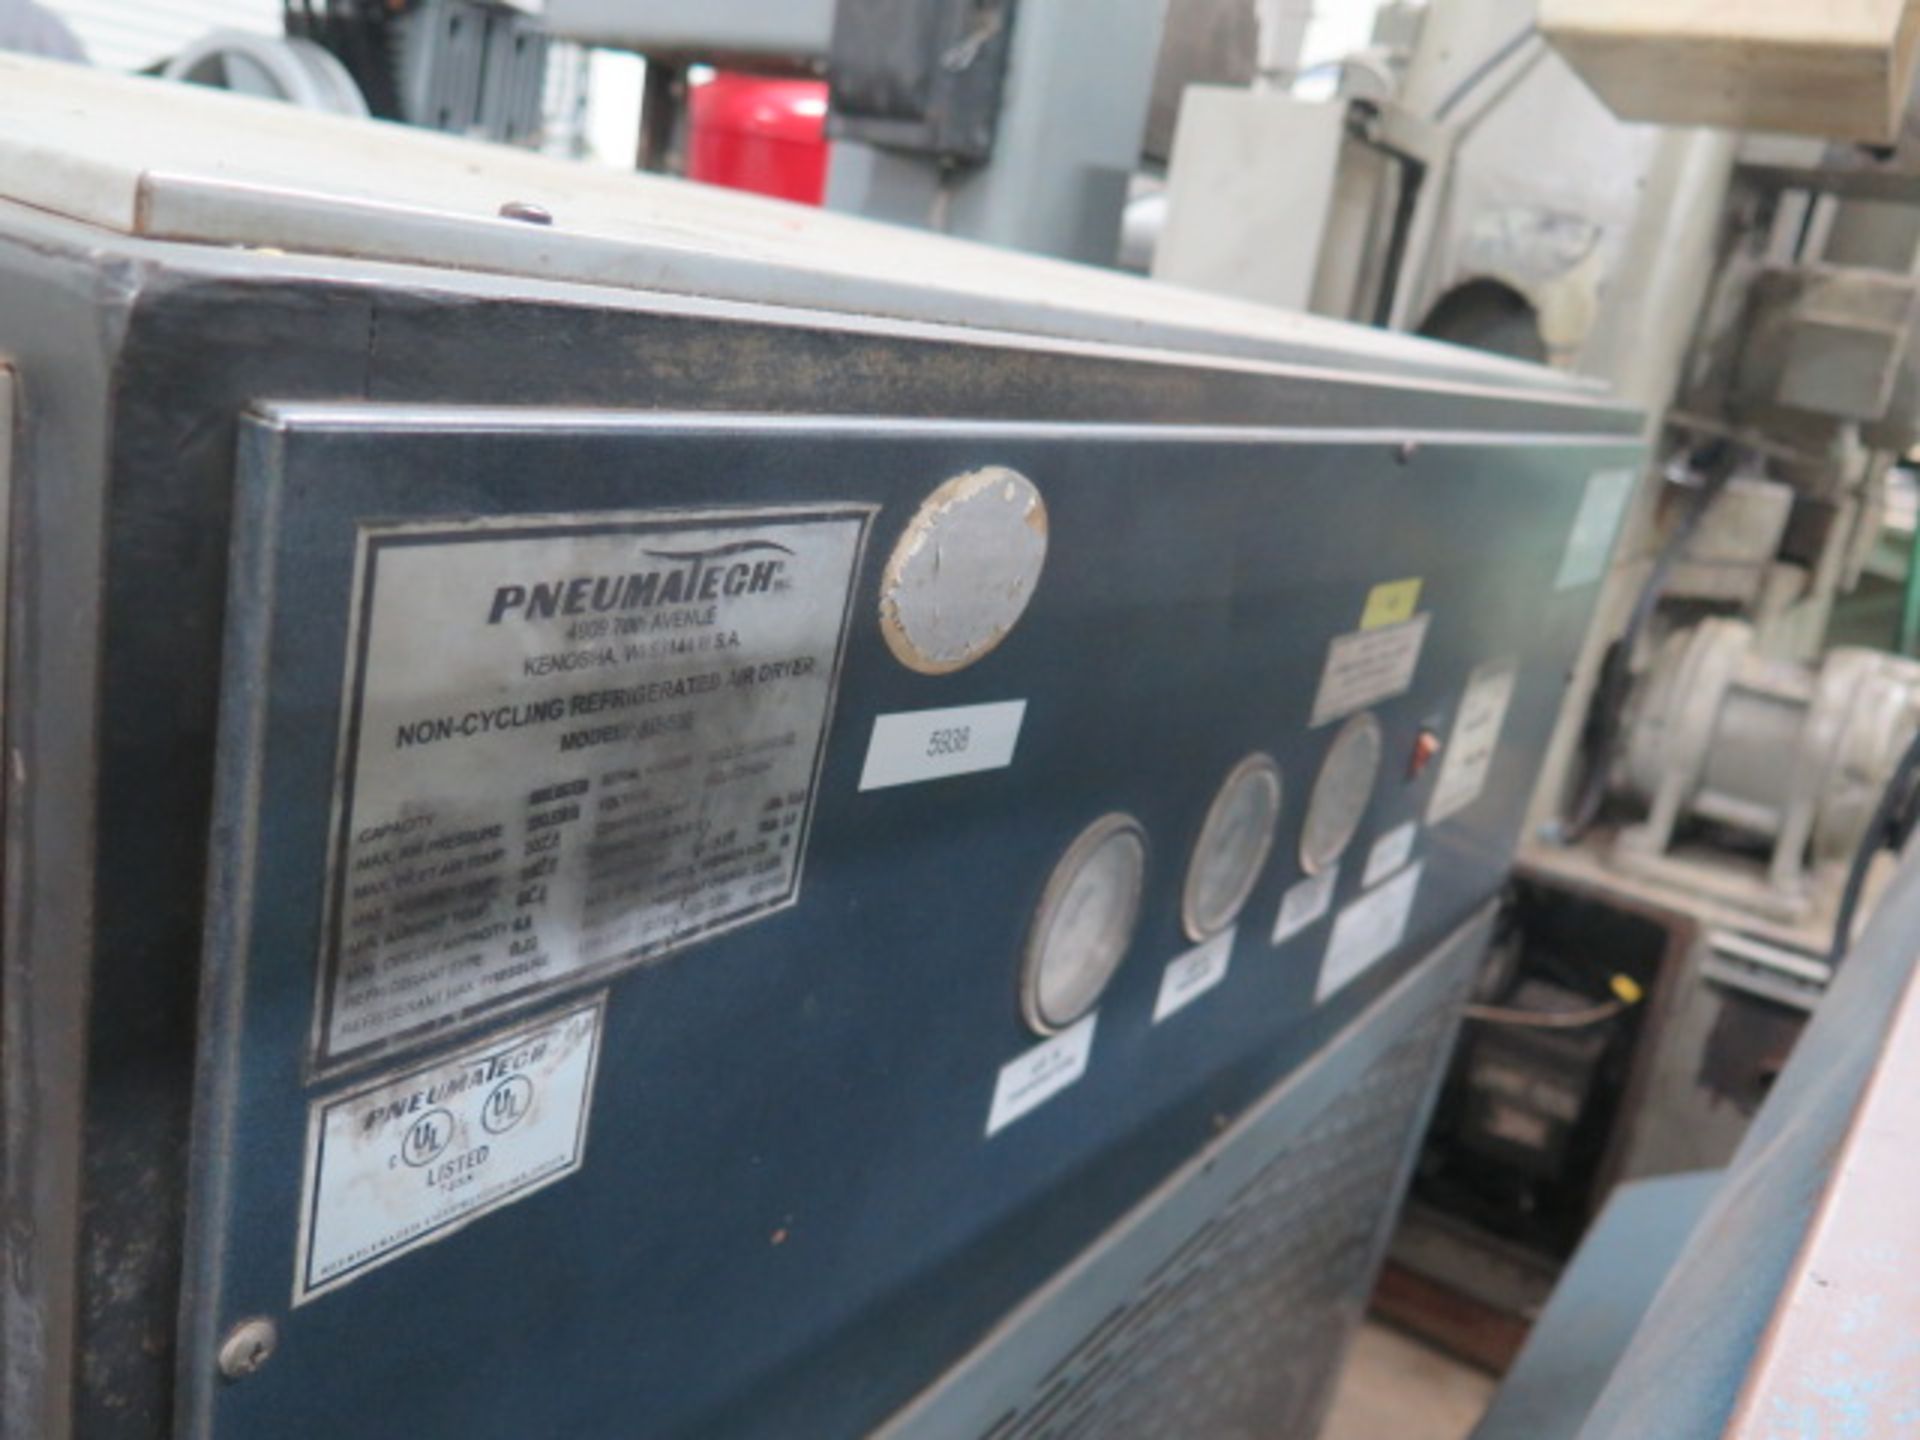 Pnaumatech AD-500 Refrigerated Air Dryer (SOLD AS-IS - NO WARRANTY) - Image 3 of 4